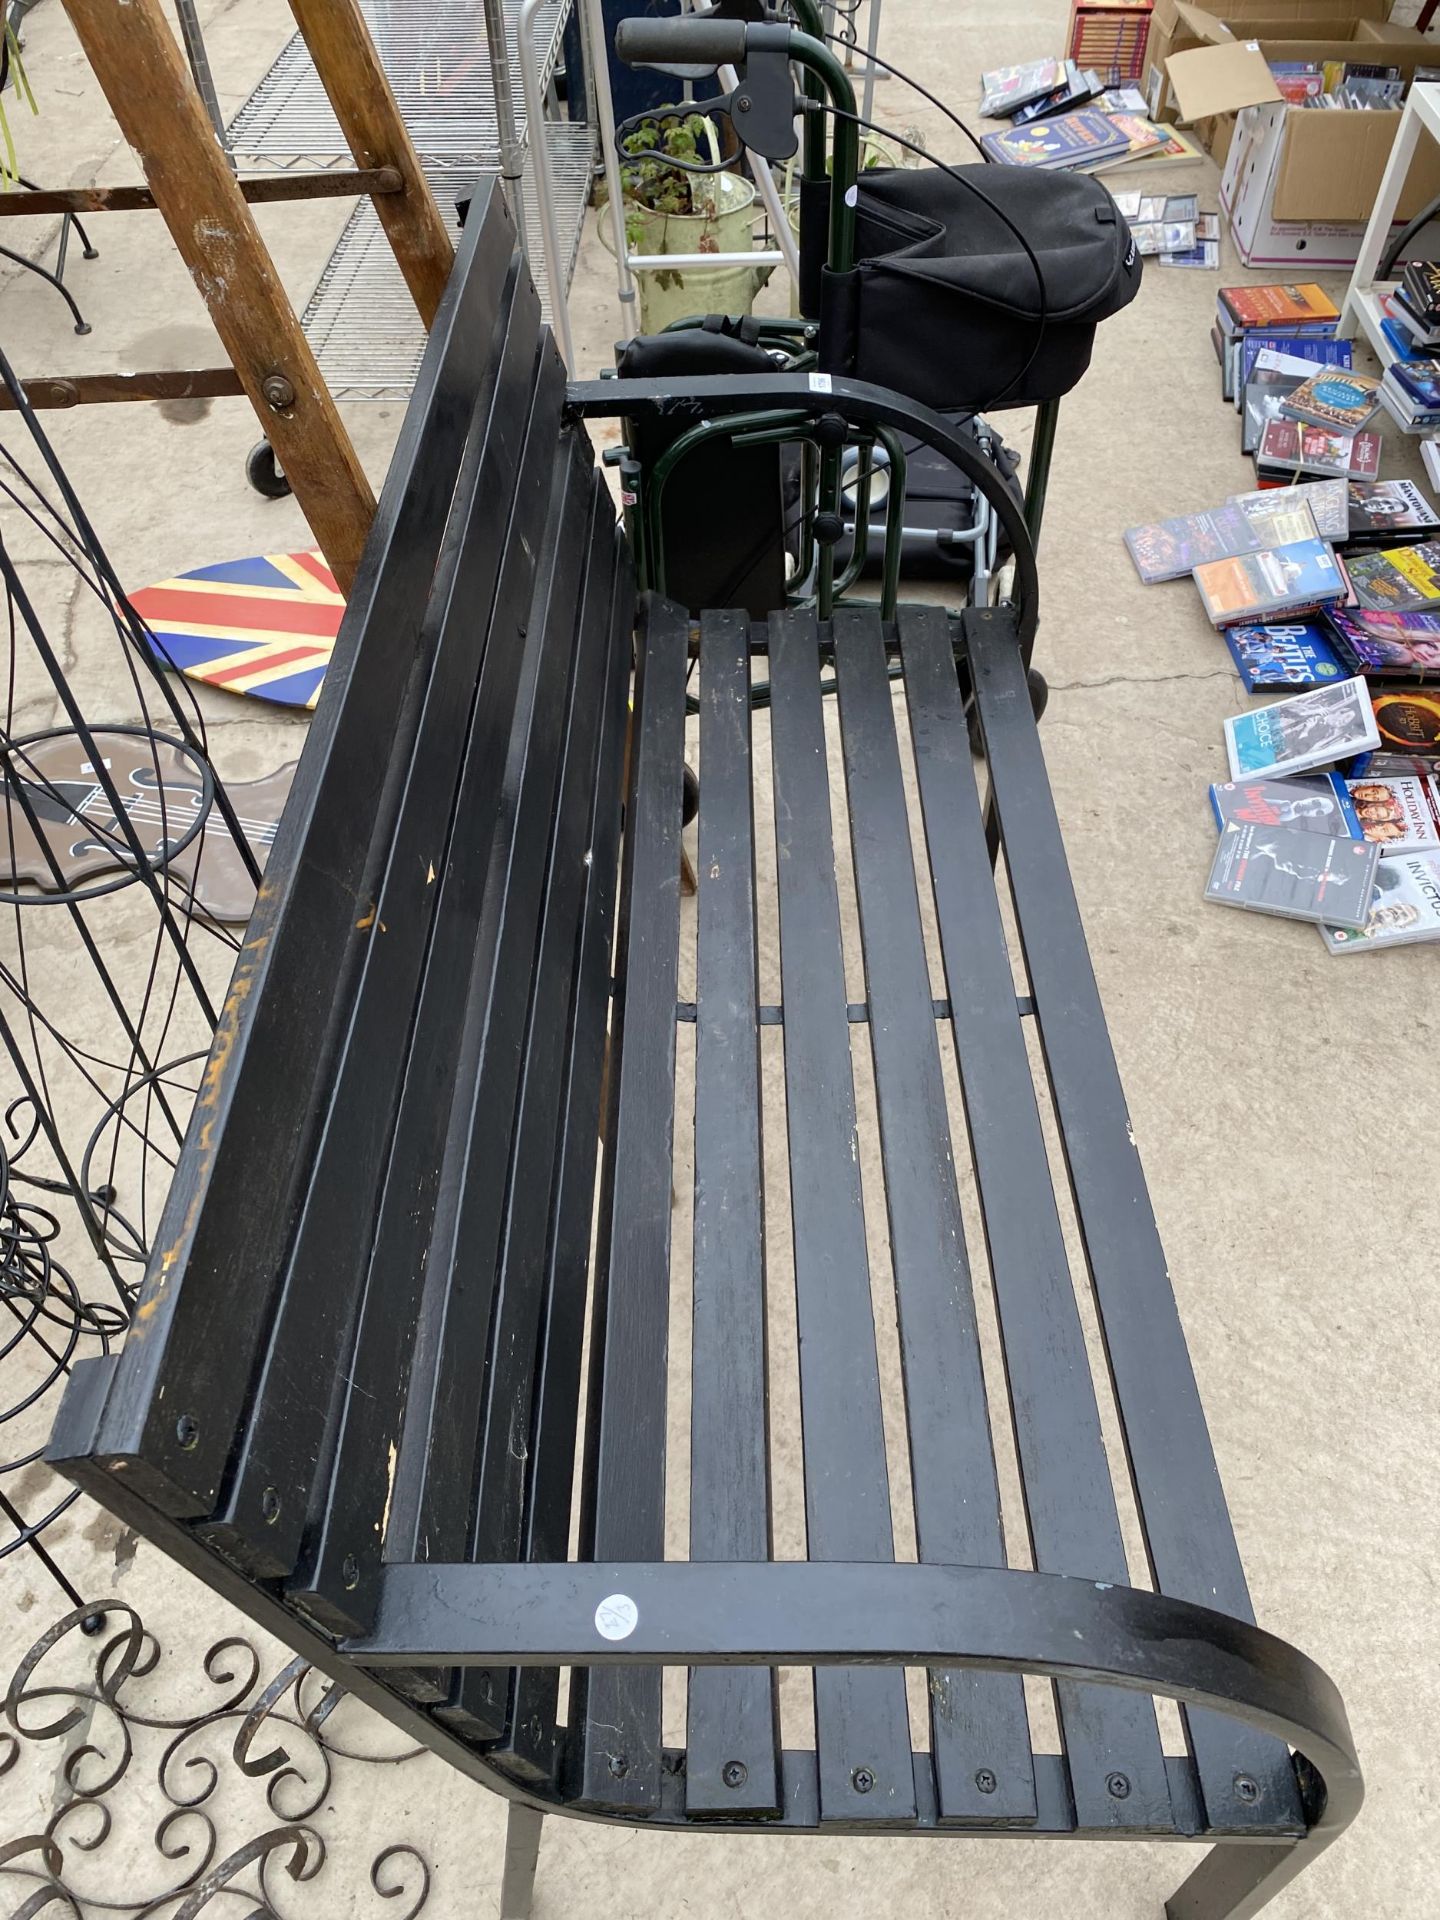 A WOODEN SLATTED GARDEN BENCH WITH METAL ENDS - Image 2 of 2